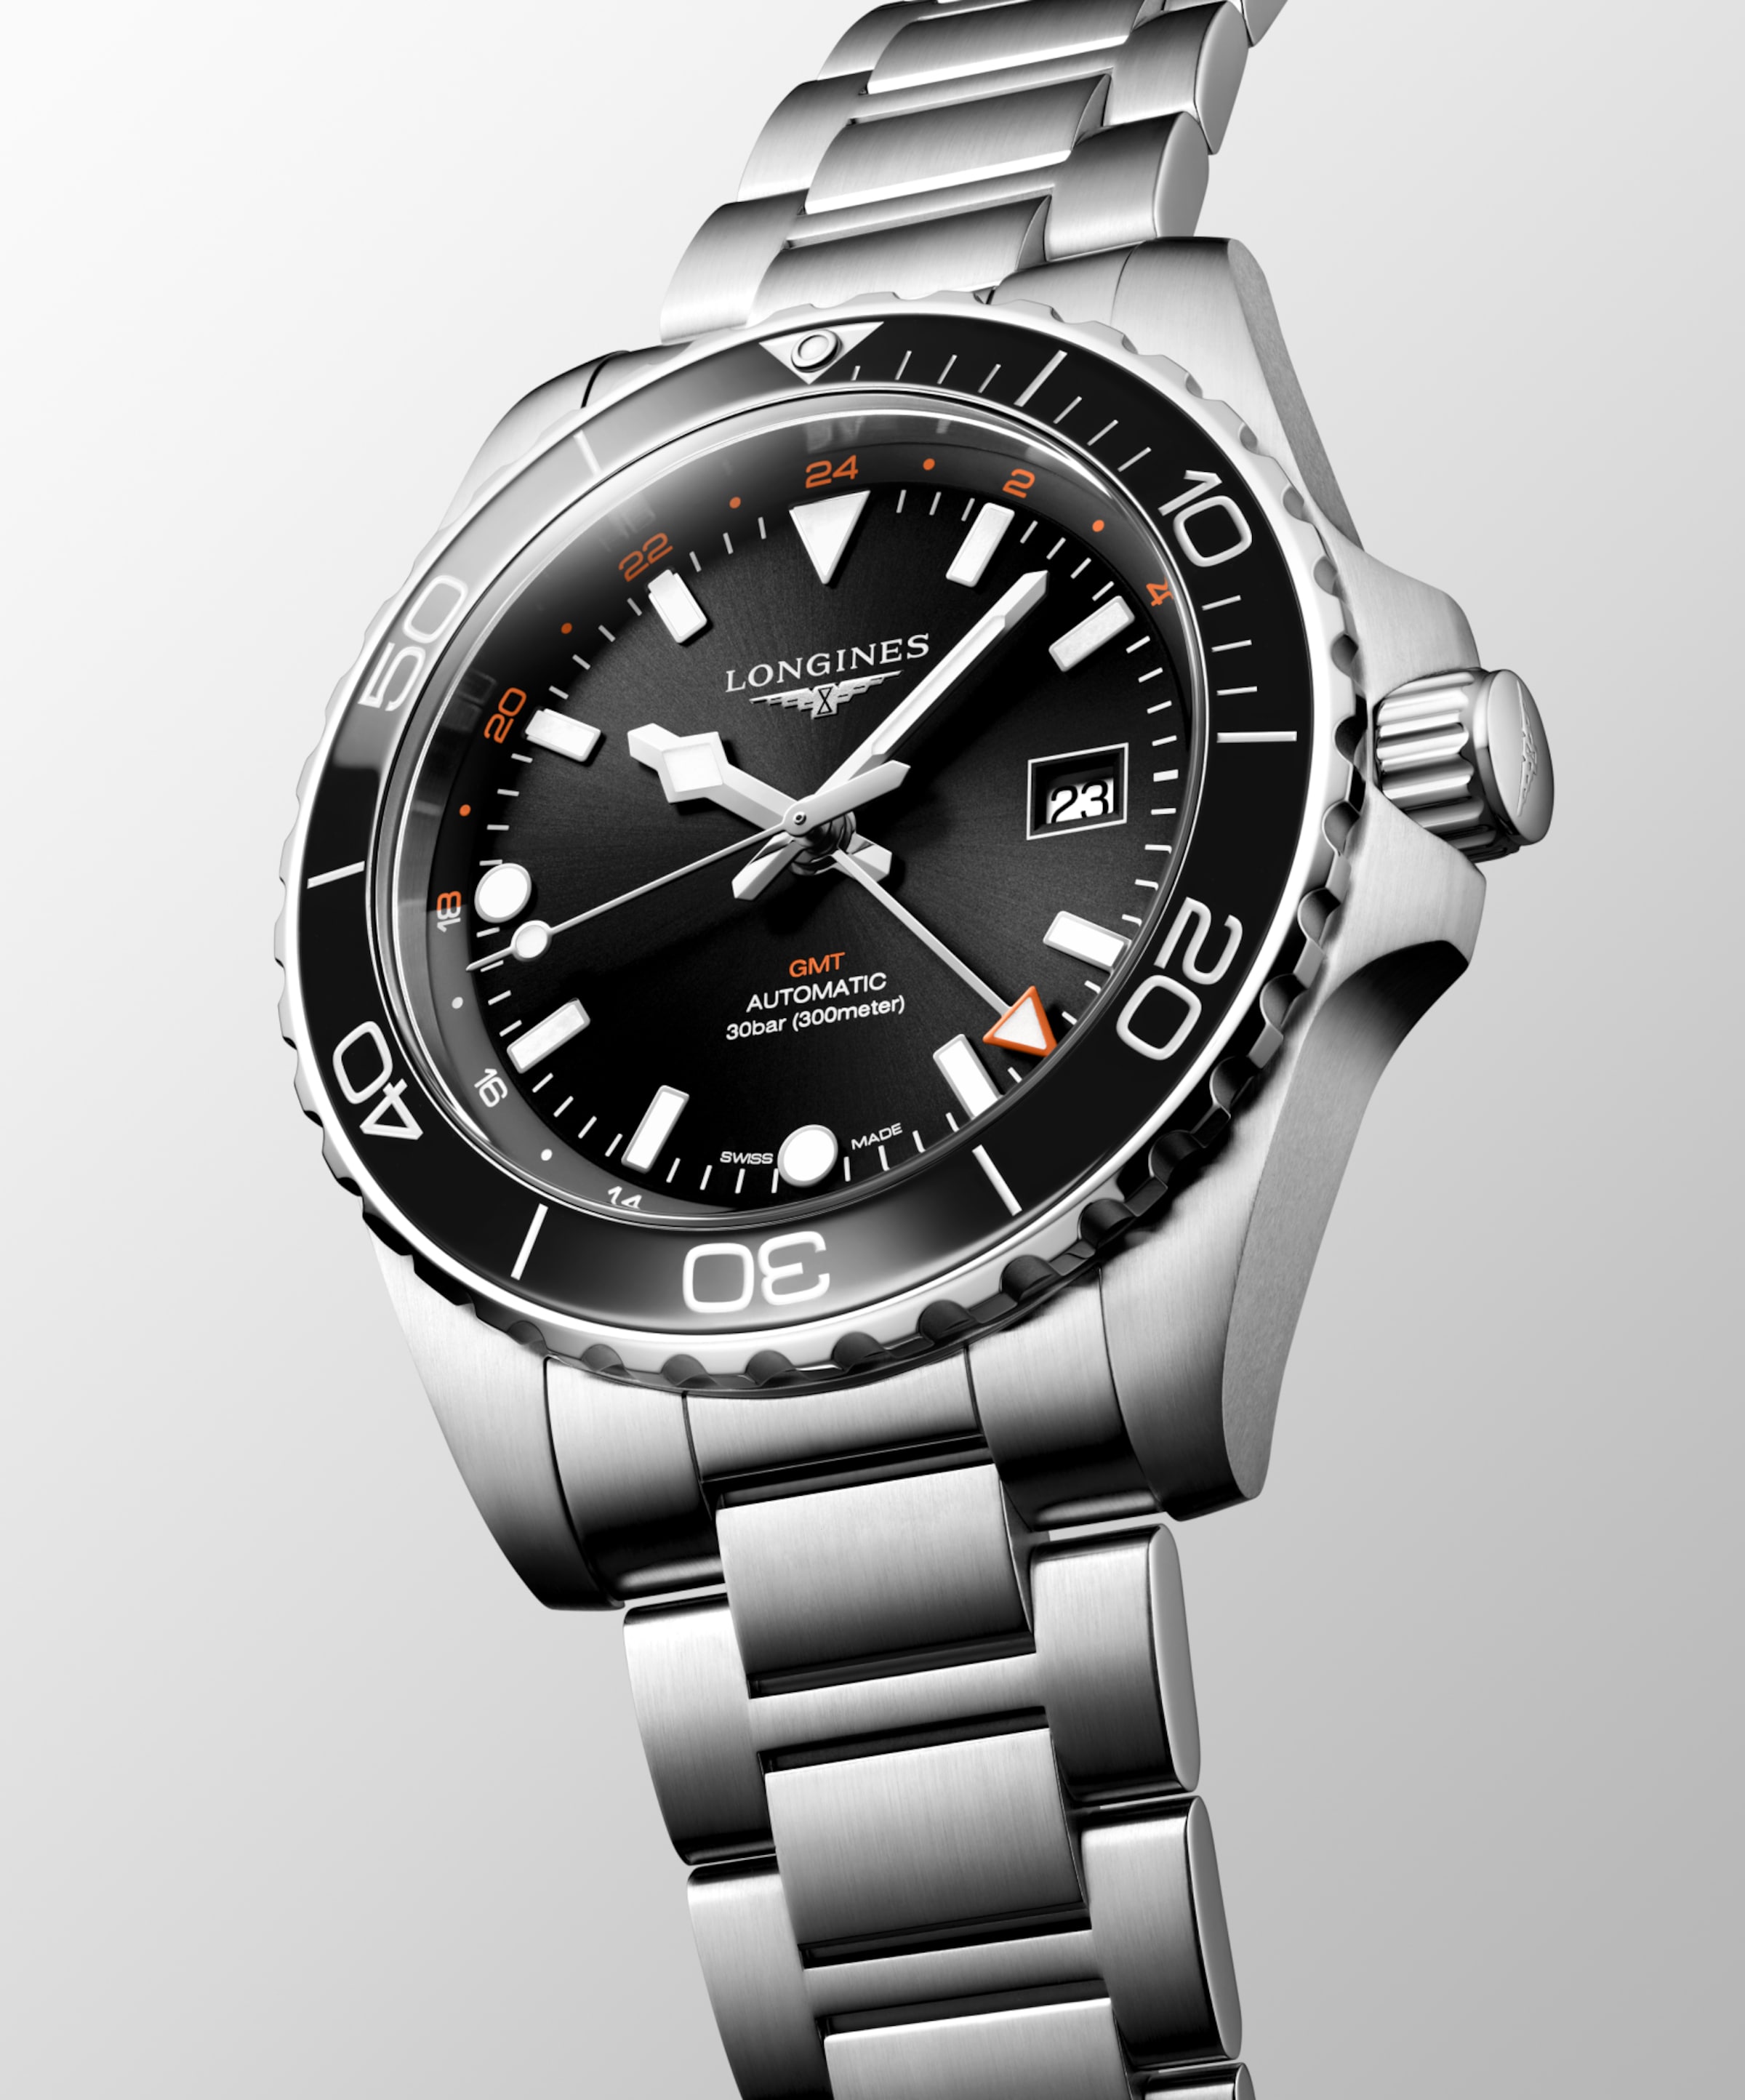 Longines HYDROCONQUEST Automatic Stainless steel and ceramic bezel Watch - L3.890.4.56.6